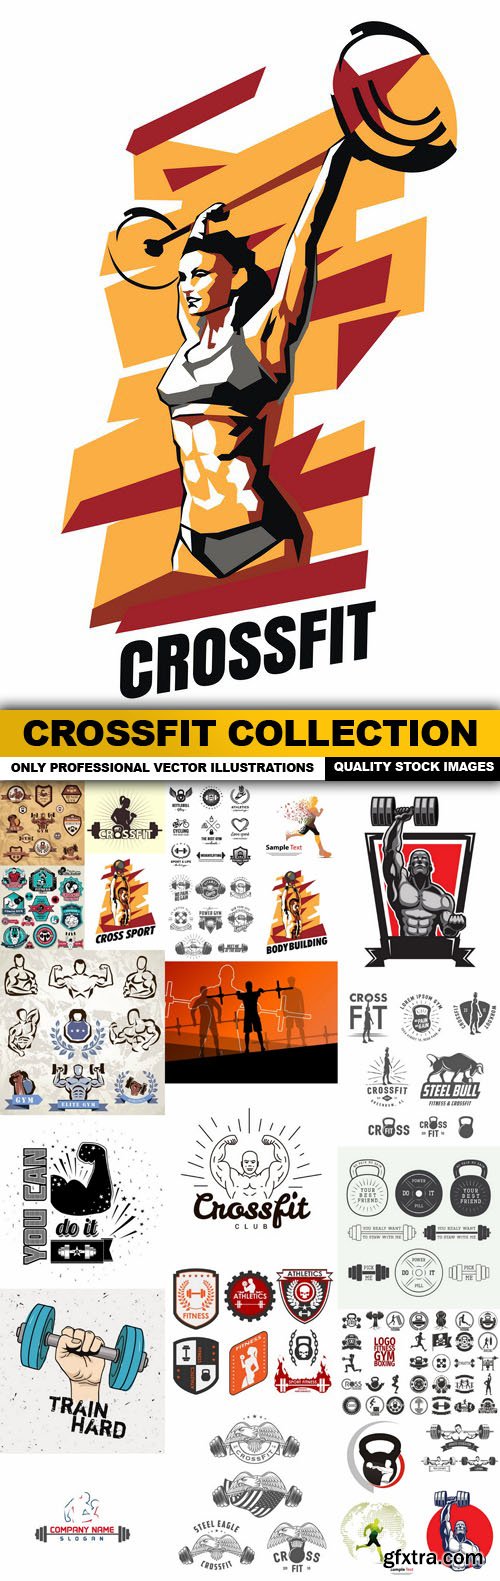 Crossfit Collection - 25 Vector